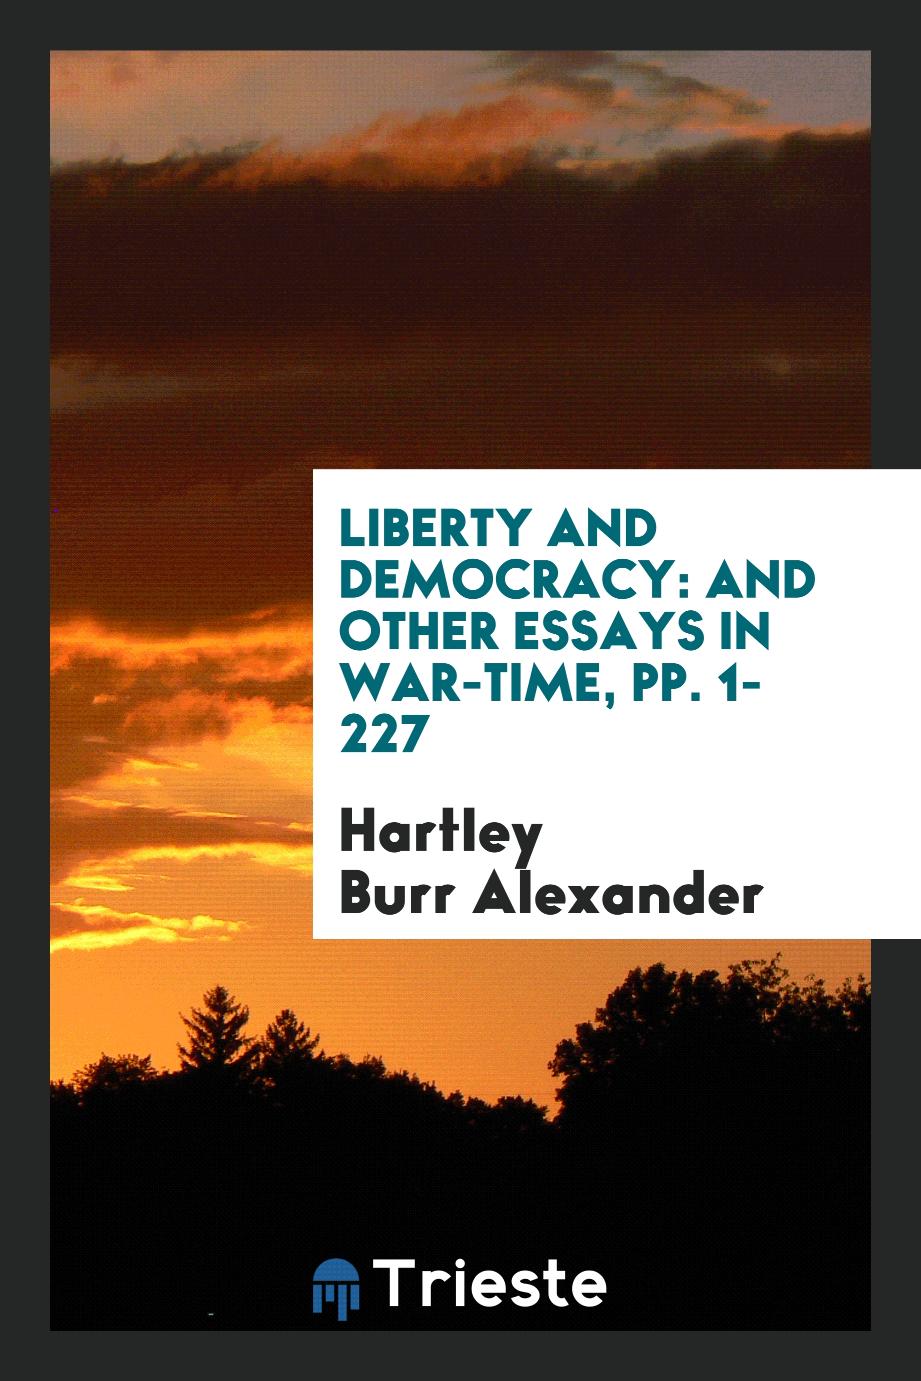 Liberty and Democracy: And Other Essays in War-Time, pp. 1-227